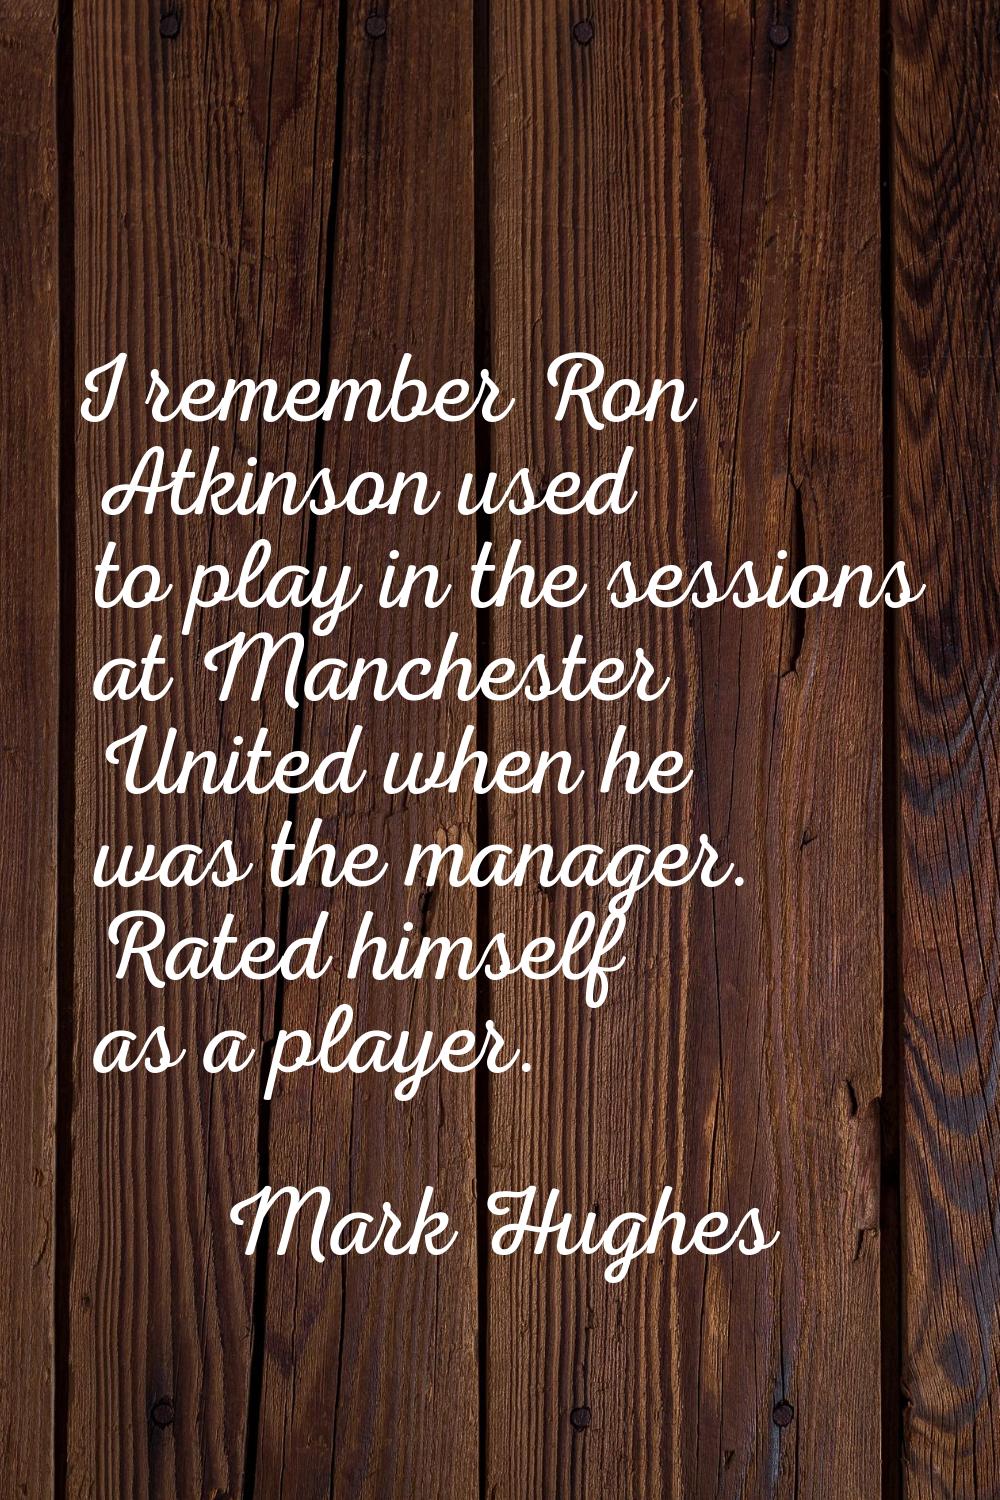 I remember Ron Atkinson used to play in the sessions at Manchester United when he was the manager. 